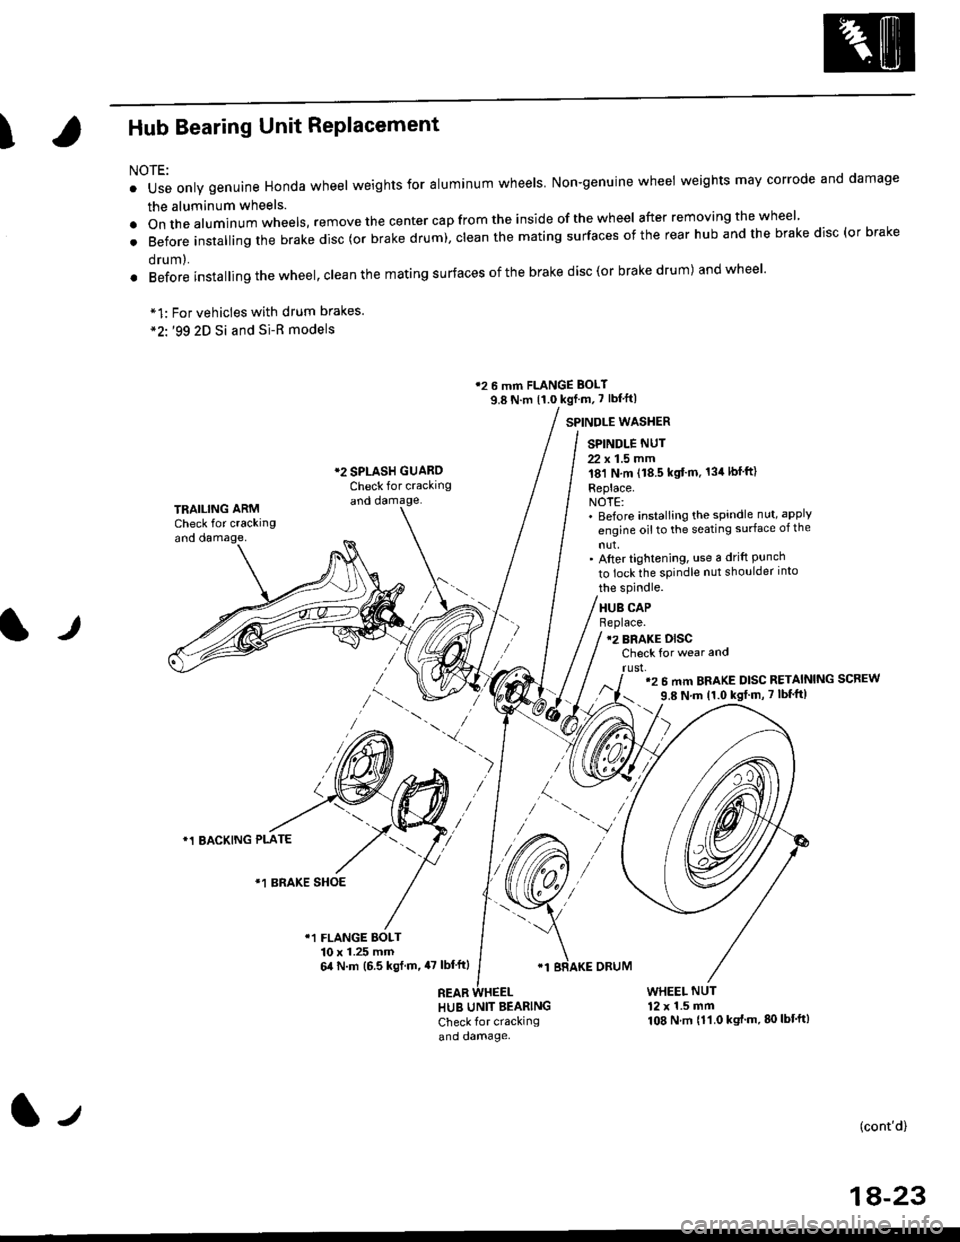 HONDA CIVIC 1998 6.G Workshop Manual IHub Bearing Unit RePlacement
For vehicles with drum brakes.99 2D Si and Si-B models
NOTE:
o Use only genuine Honda wheel weights for aluminum wheels Non-genuine wheel weights may corrode and damage
